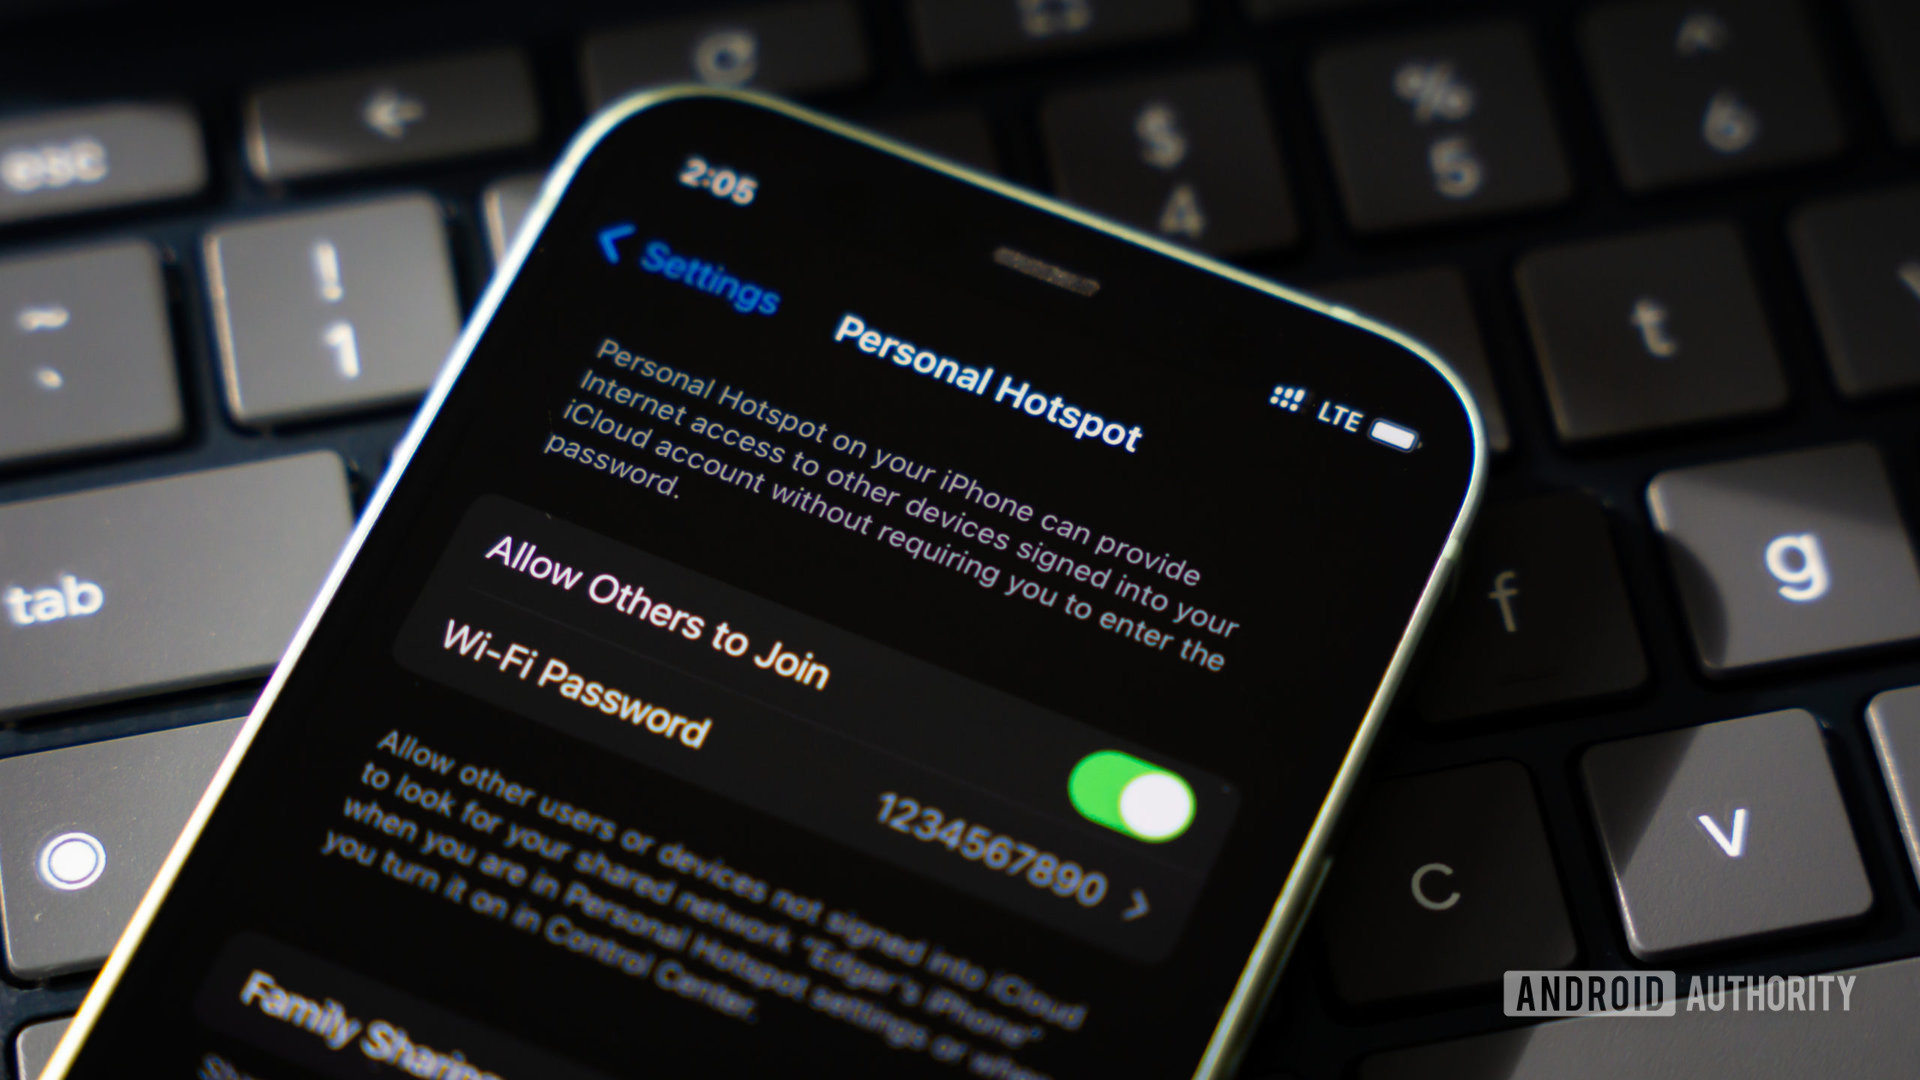 iPhone personal hotspot tethering stock photo 3